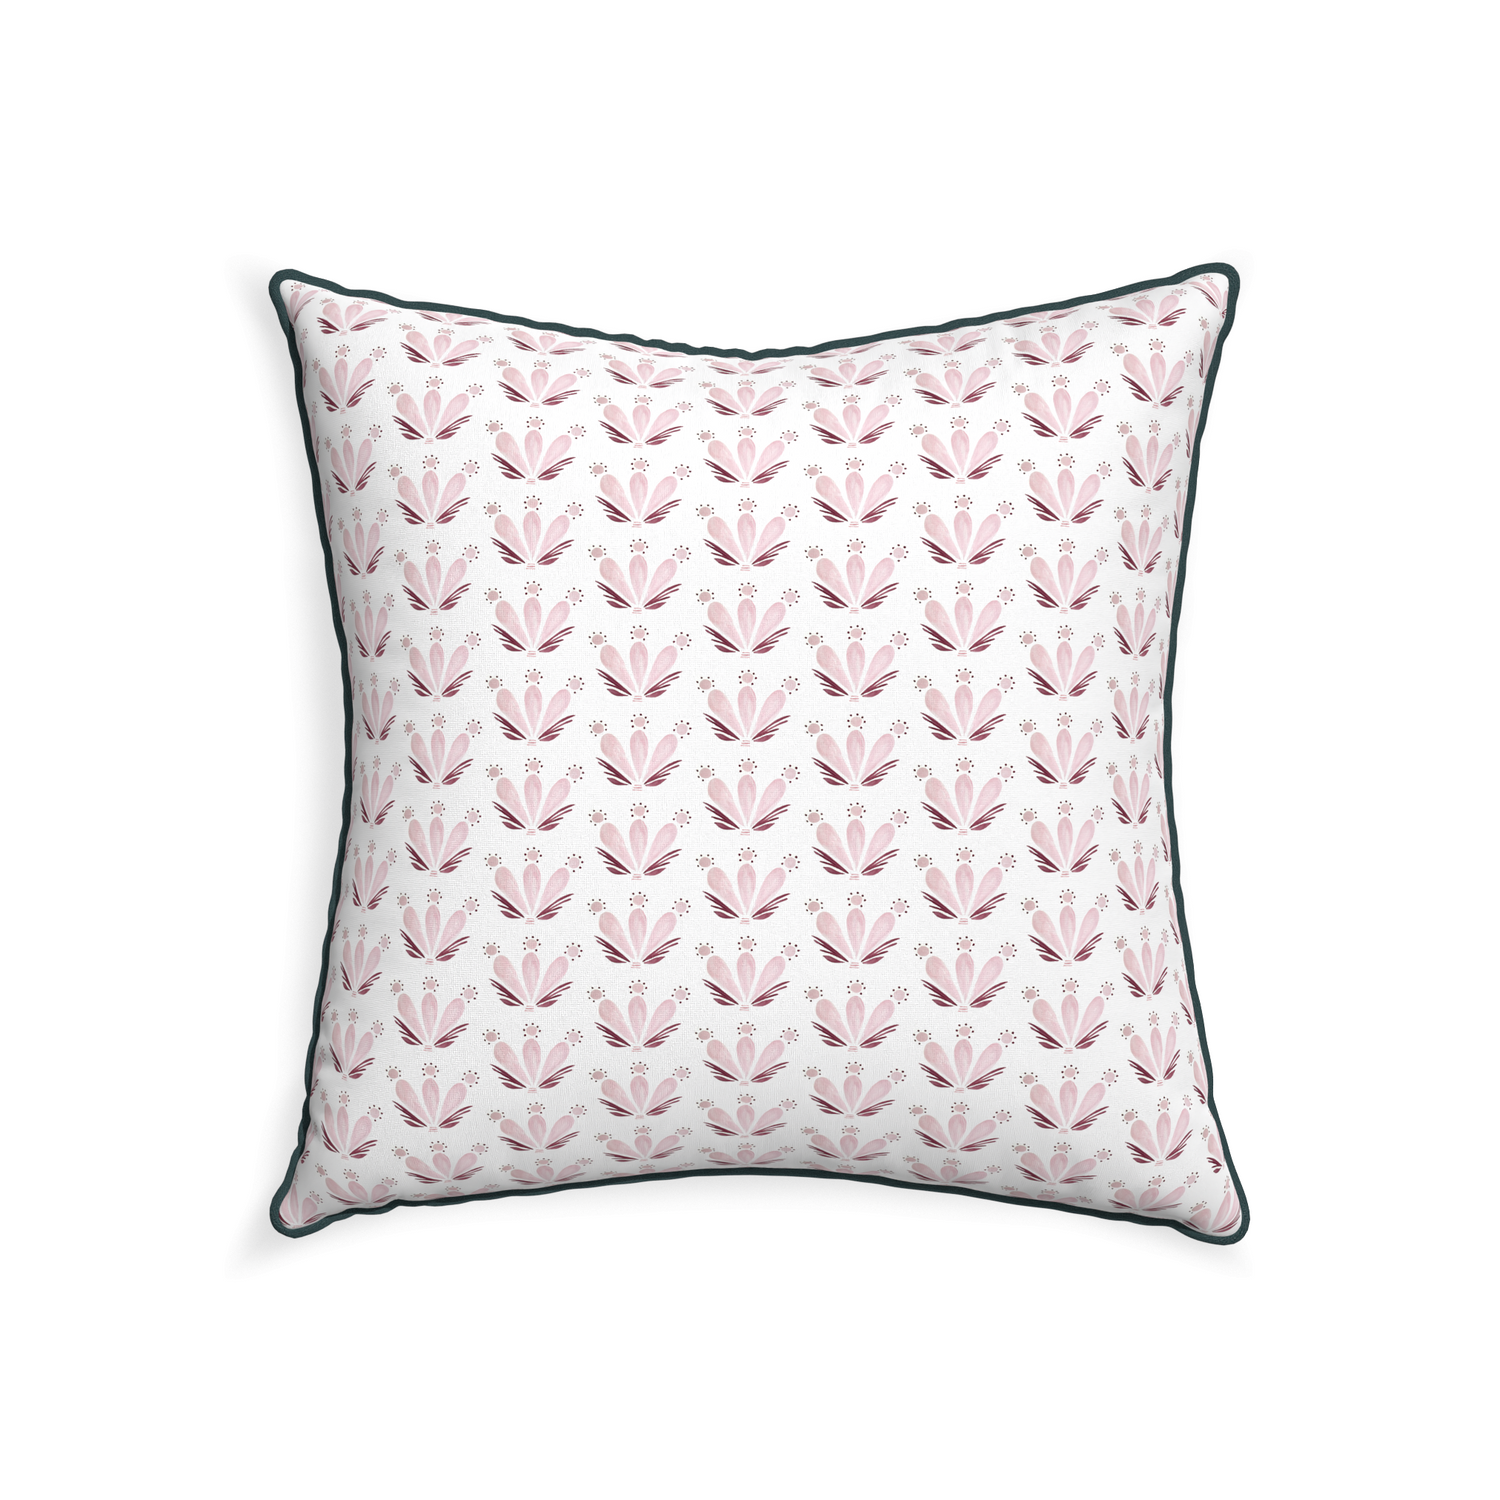 22-square serena pink custom pink & burgundy drop repeat floralpillow with p piping on white background